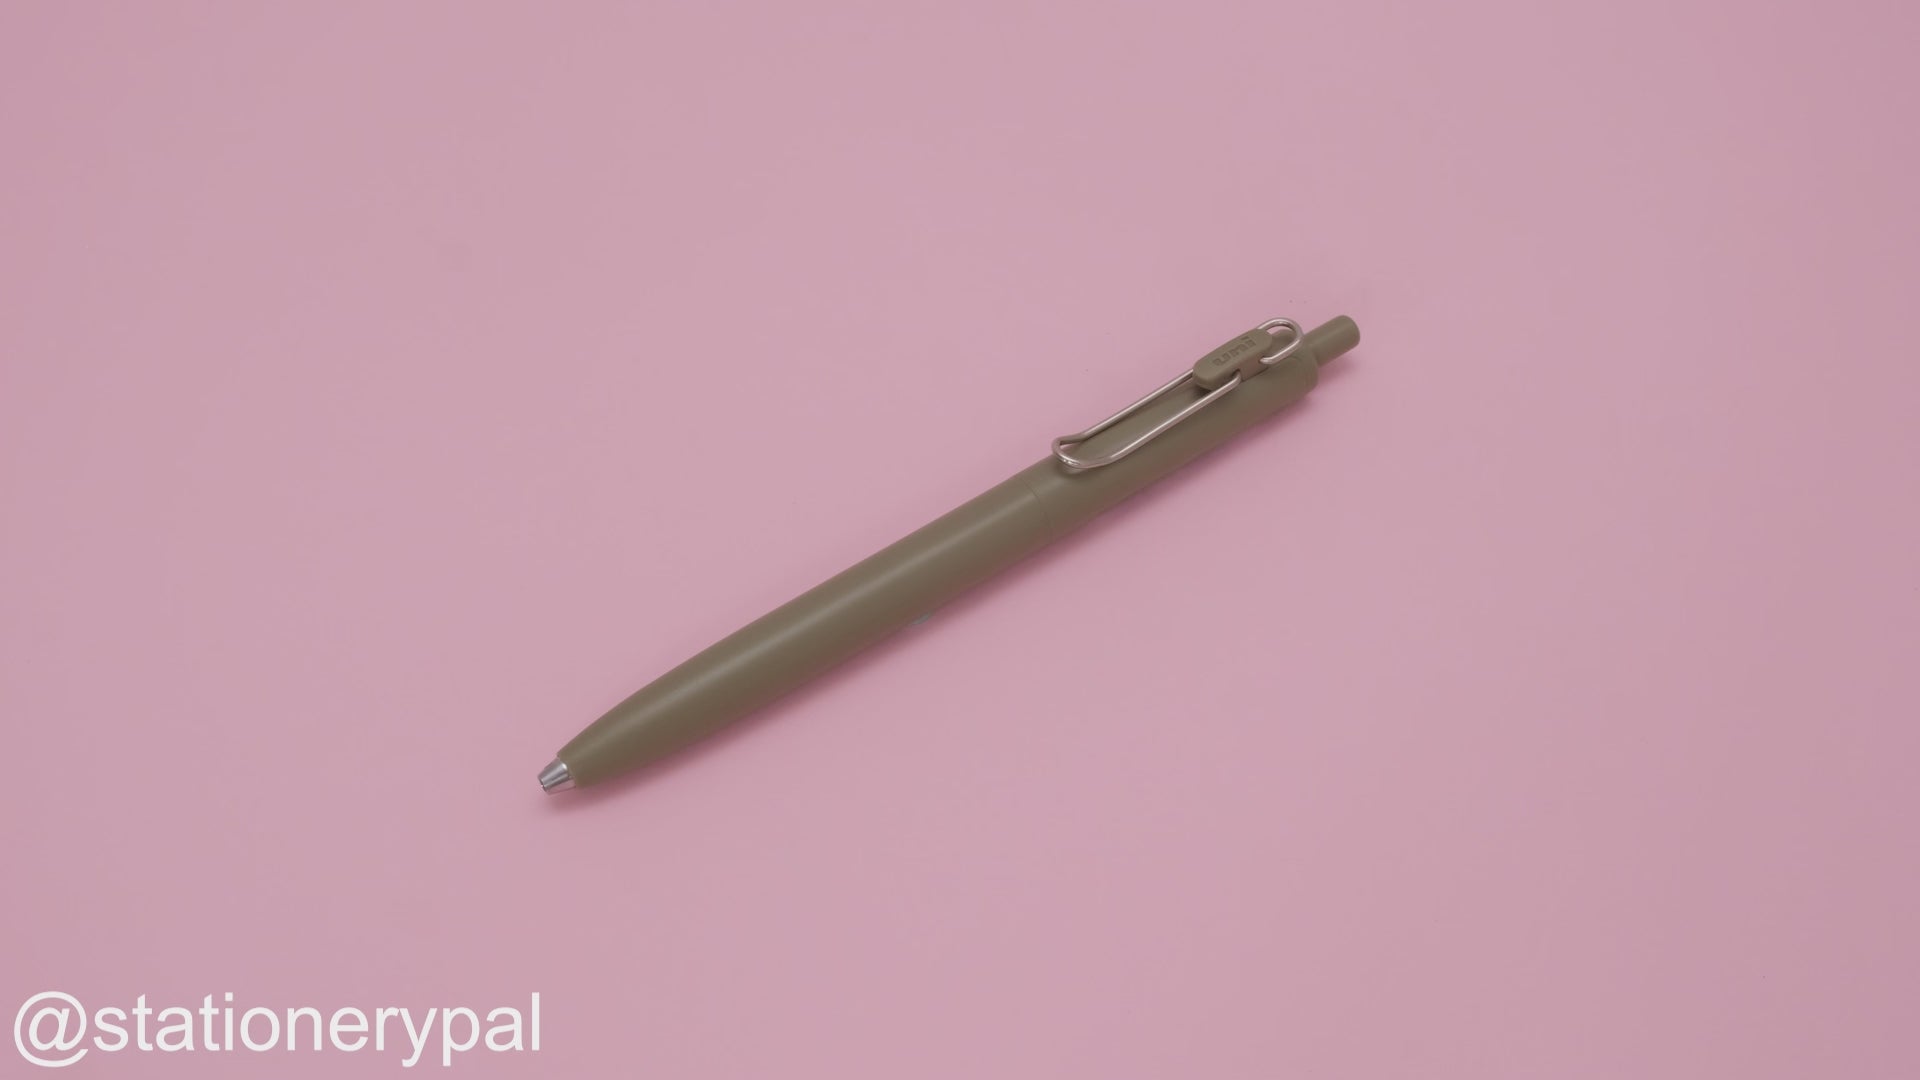 Uni-ball One F Gel Pen - 0.5 mm - Limited Color - Olive Body